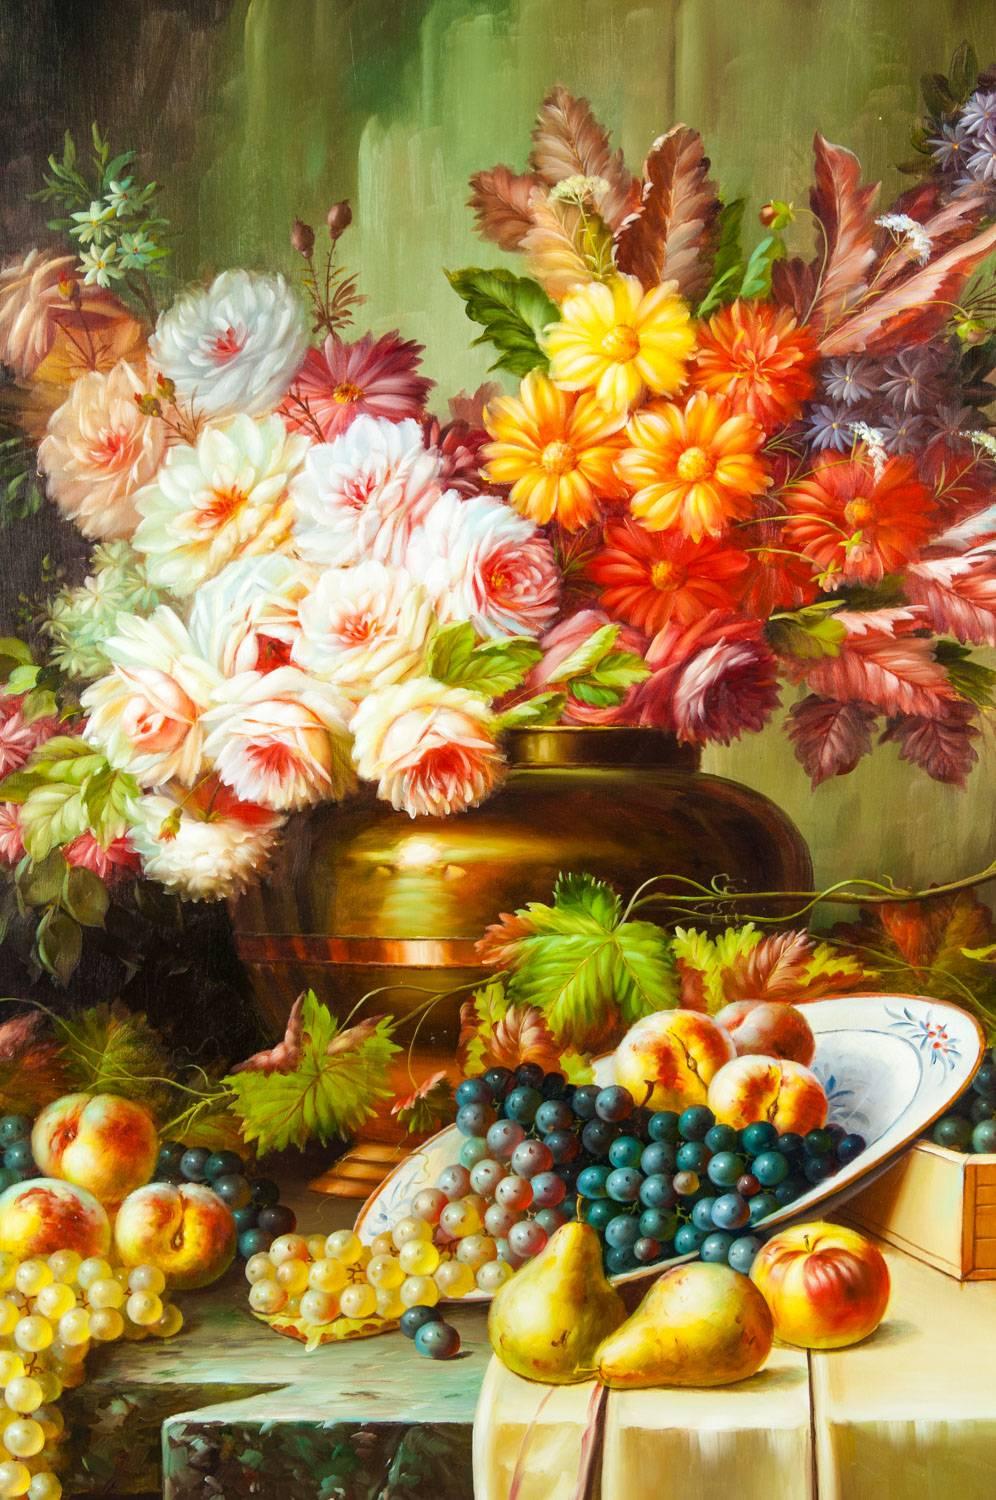 Ornately gilded wood carved frame, oil painting floral bouquet still life, Continental style. This is a highly detailed still life, oil on canvas depicting an overflowing flower arrangement with fruit. Signed by the artist on the lower right hand